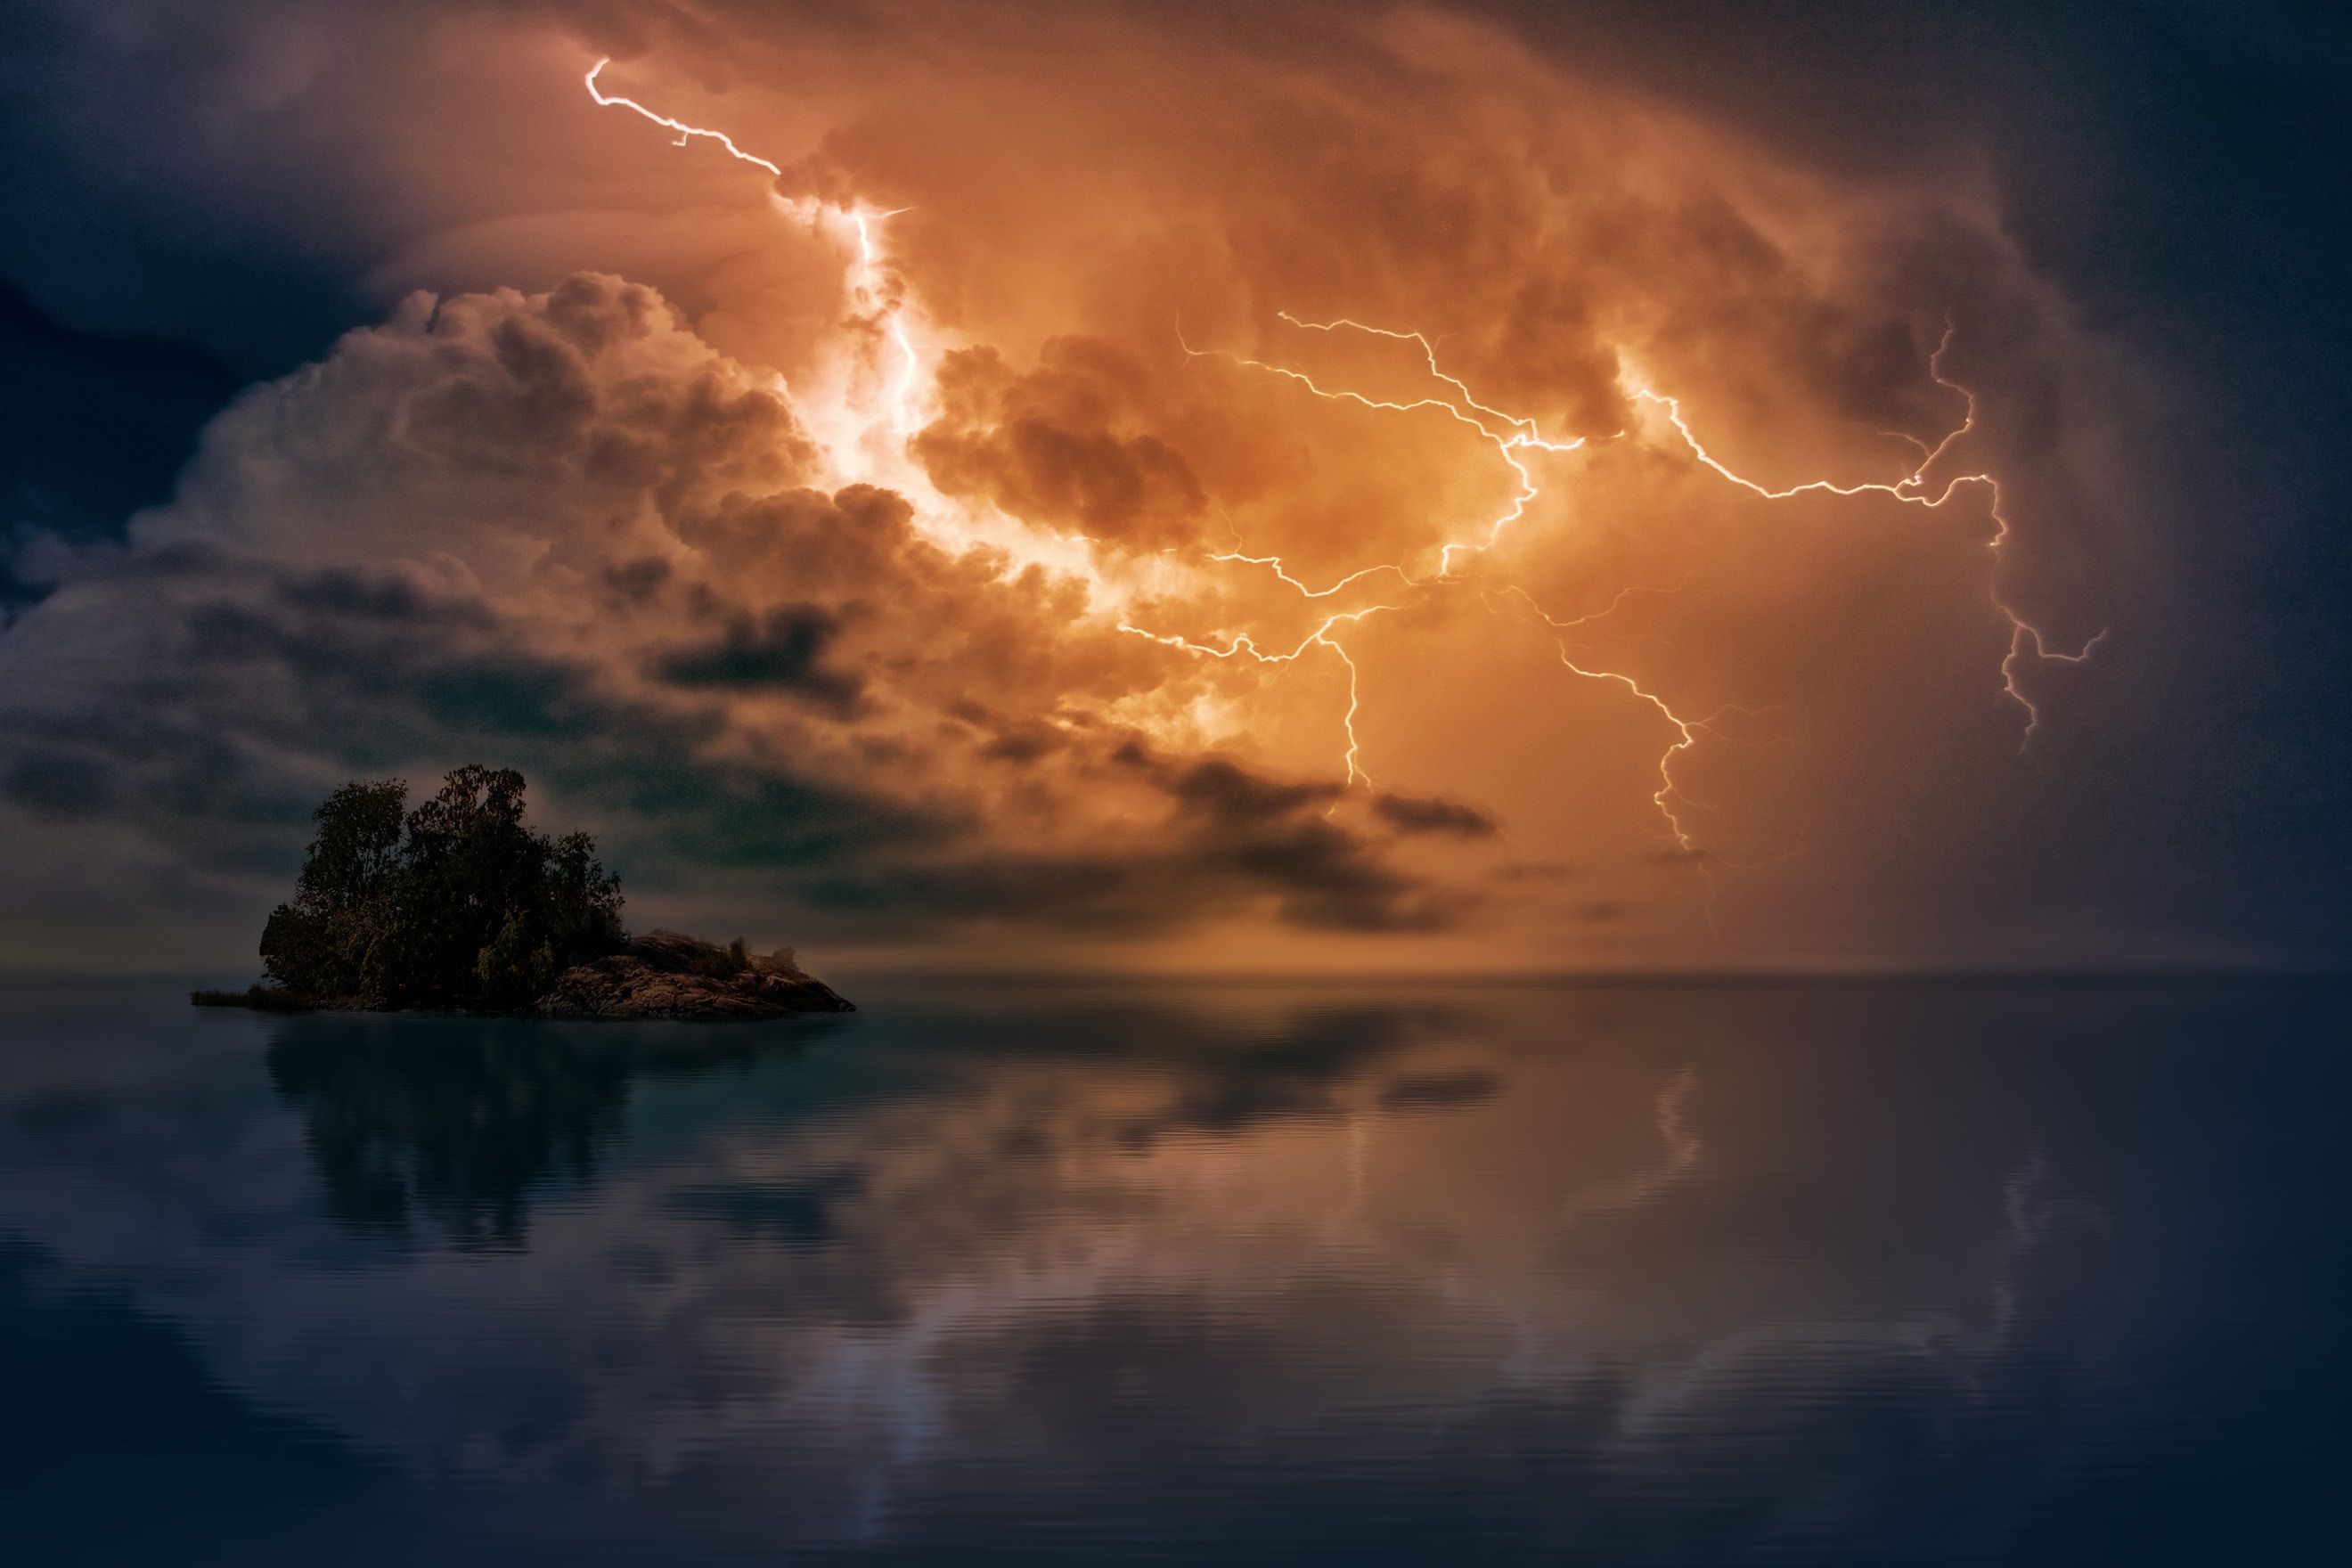 A stormy sky over the ocean with lightning - Storm